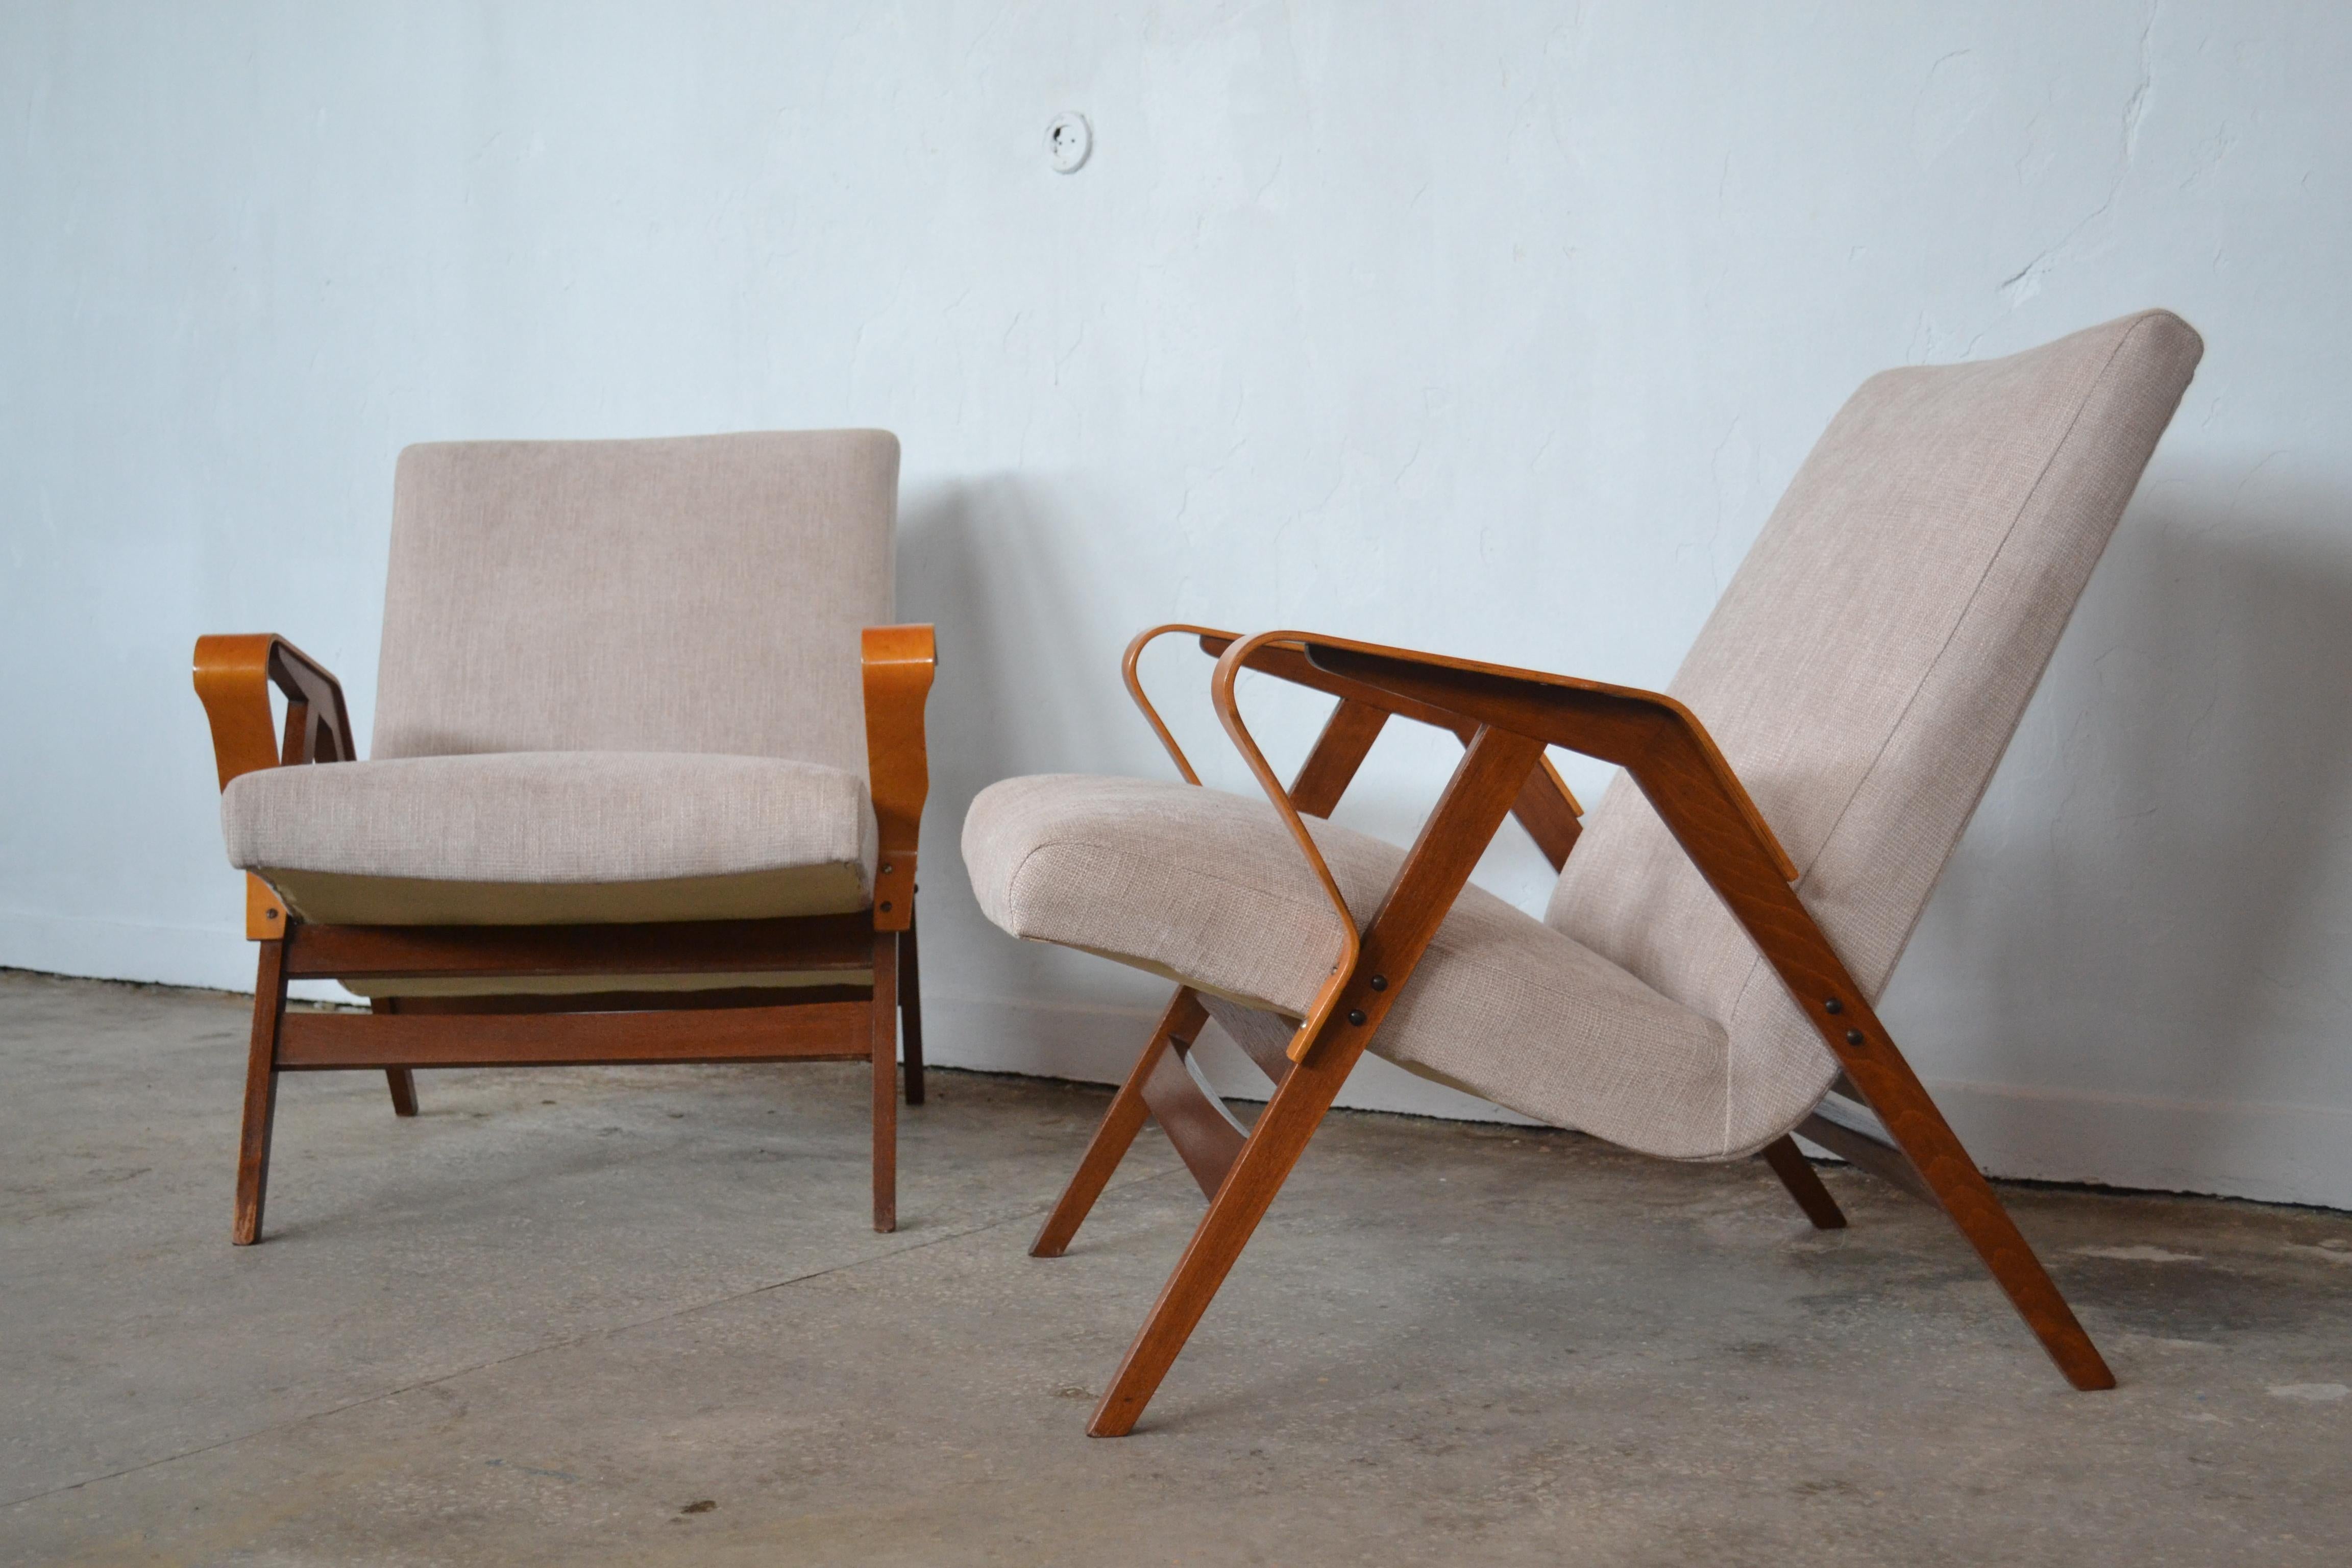 - Pair of Tatra Nabytok armchairs from the 1960s
- Seats have been reupholstered
- Structures in original condition and in a 1960s style.